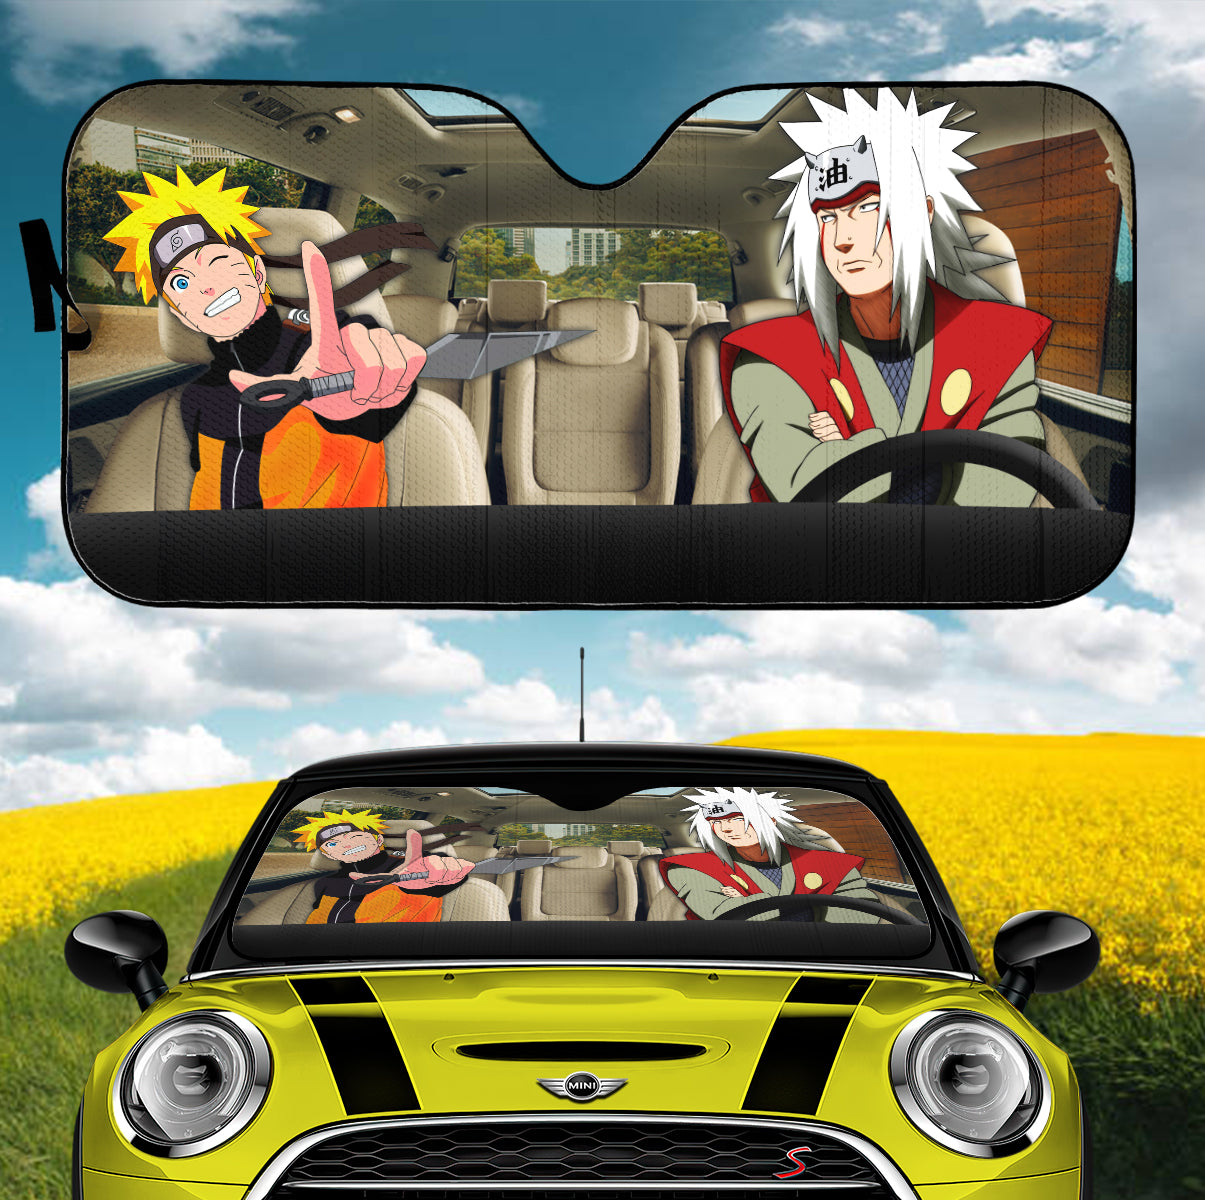 Just Funky Naruto Shippuden Characters Sunshade For Car Windshield